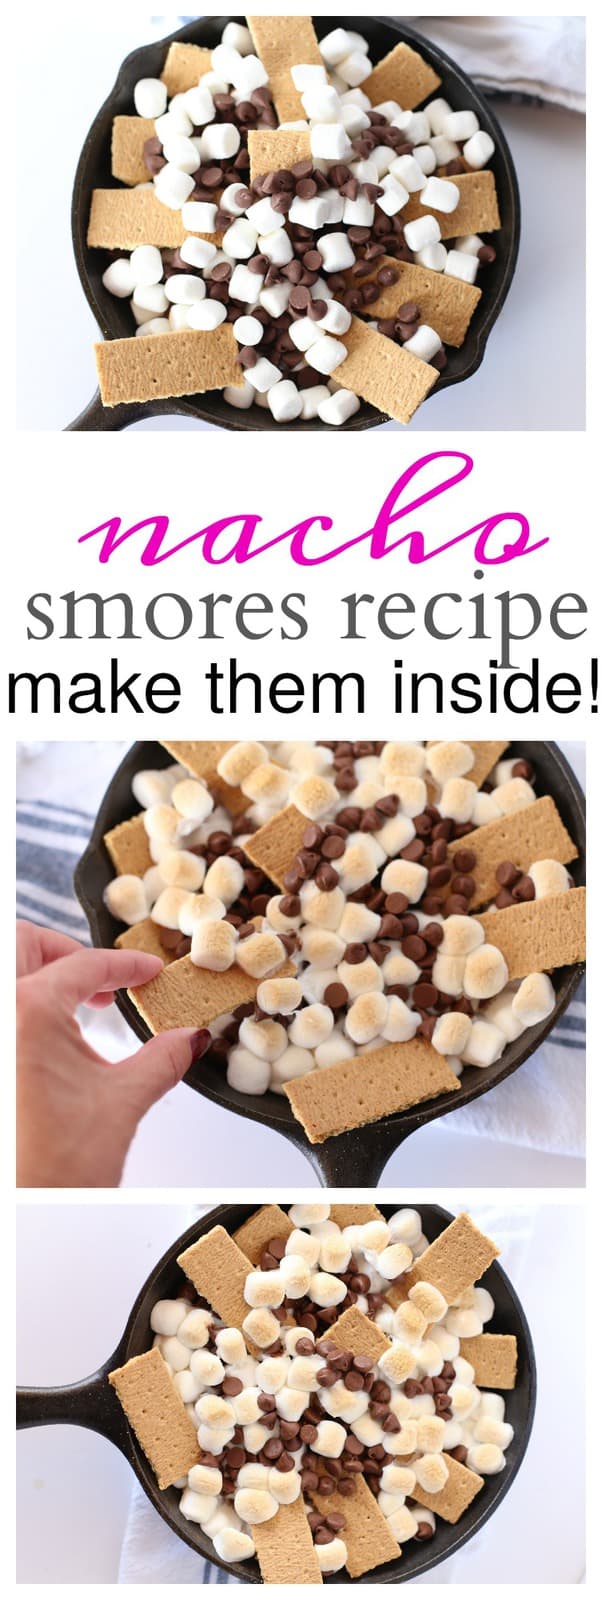 A pan of graham crackers, marshmallows and chocolate chips with a text above it.